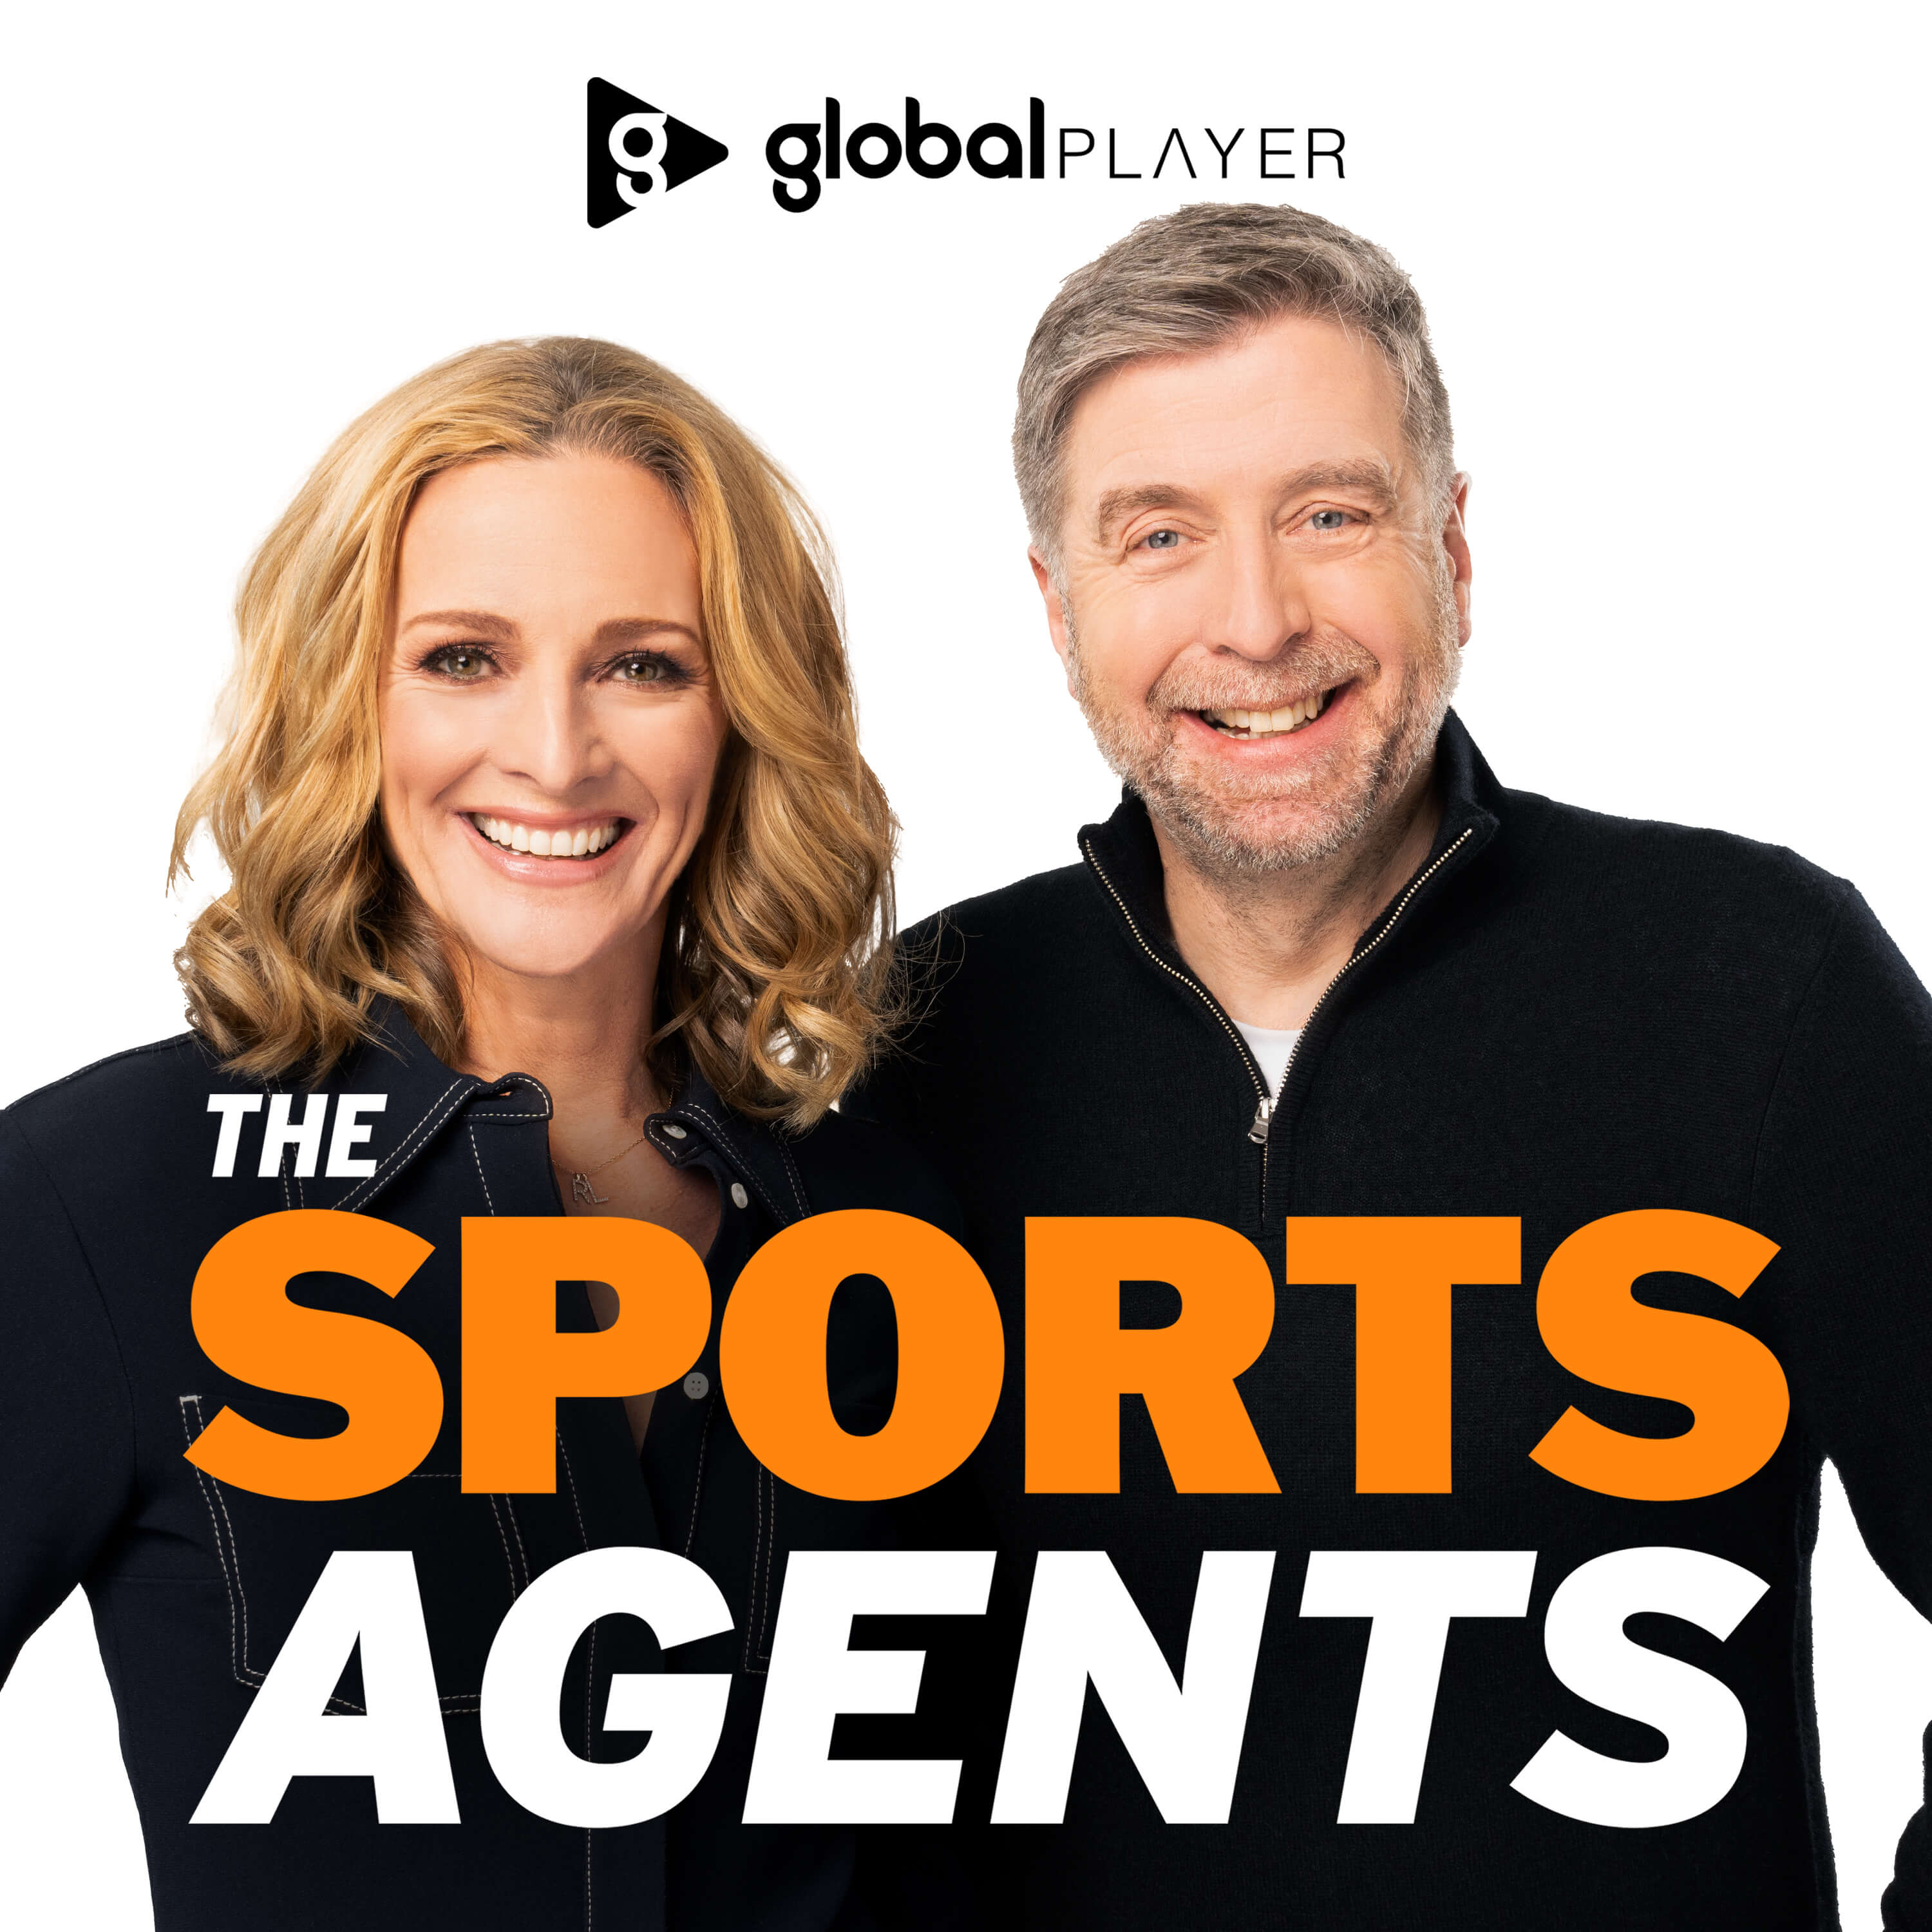 Weekend Edition - The Sports Agents